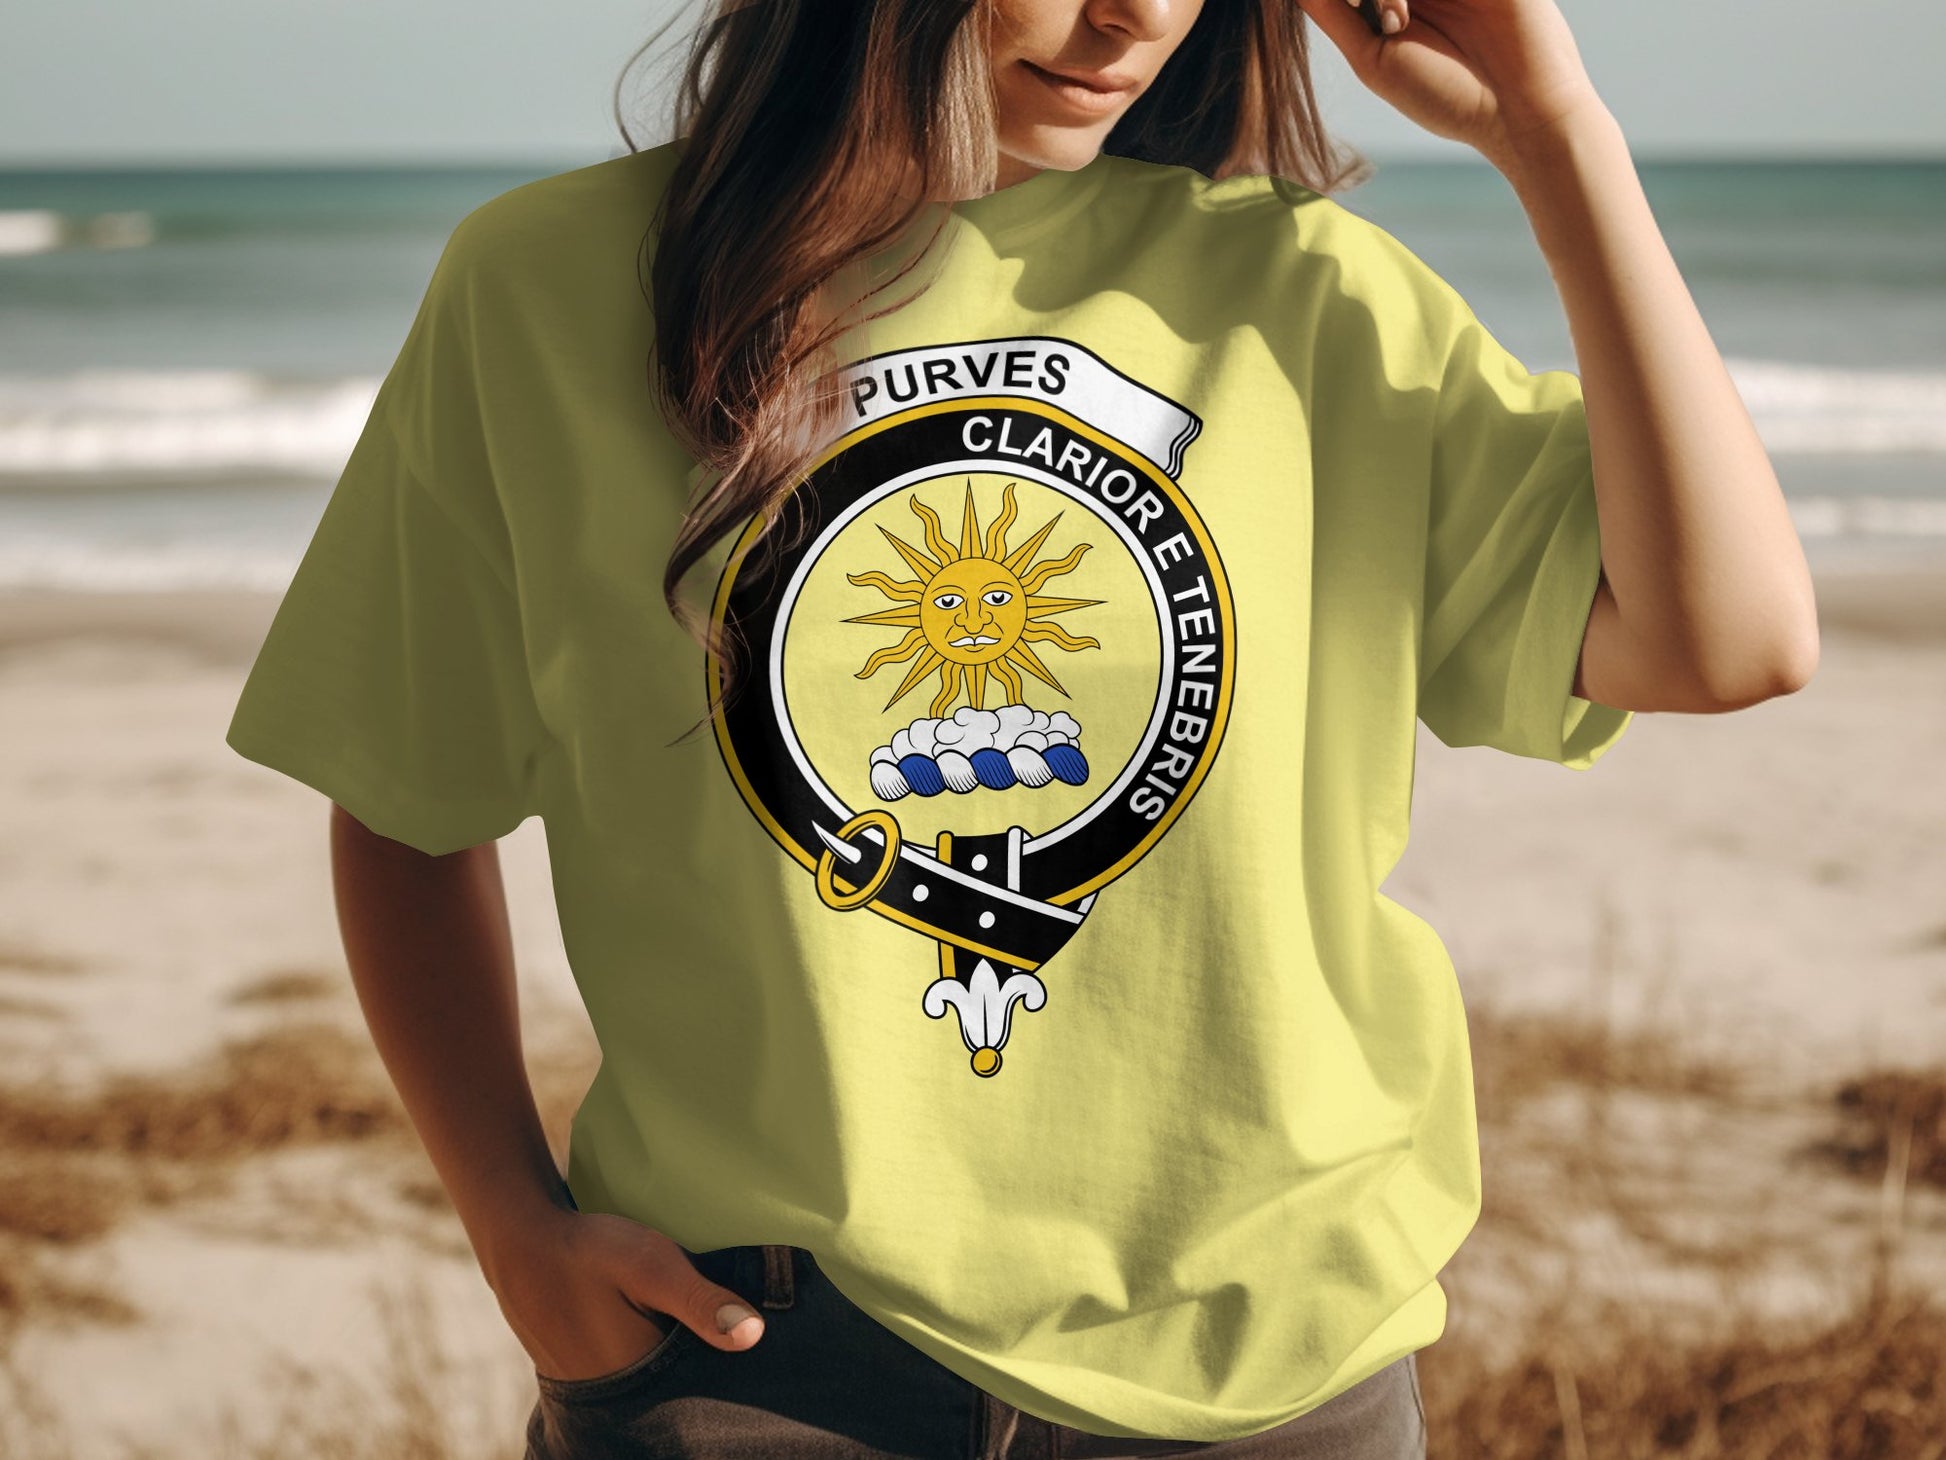 Purves Scottish Clan Crest Clarion E Tenebris T-Shirt - Living Stone Gifts